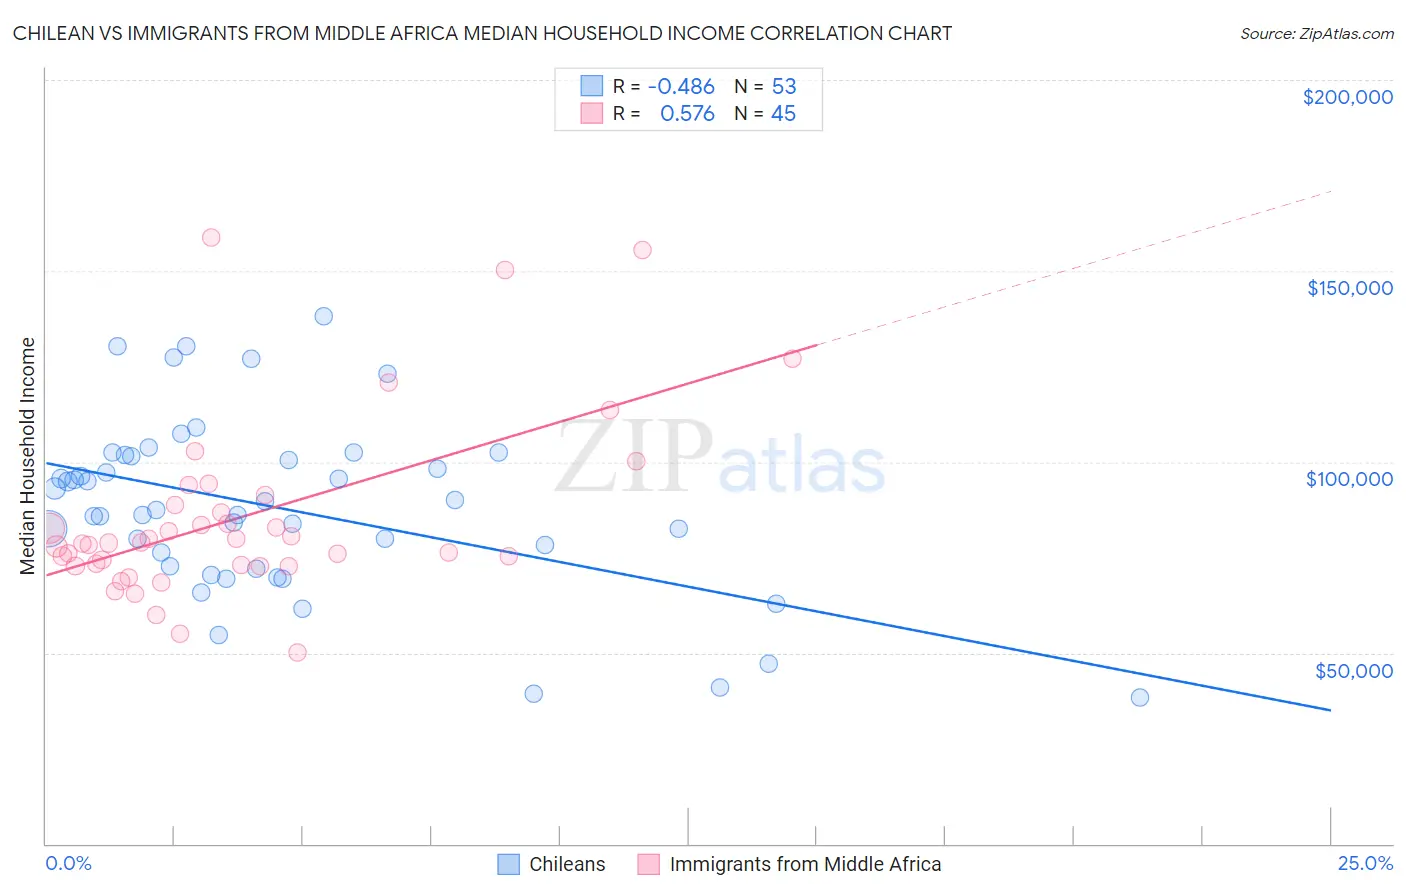 Chilean vs Immigrants from Middle Africa Median Household Income